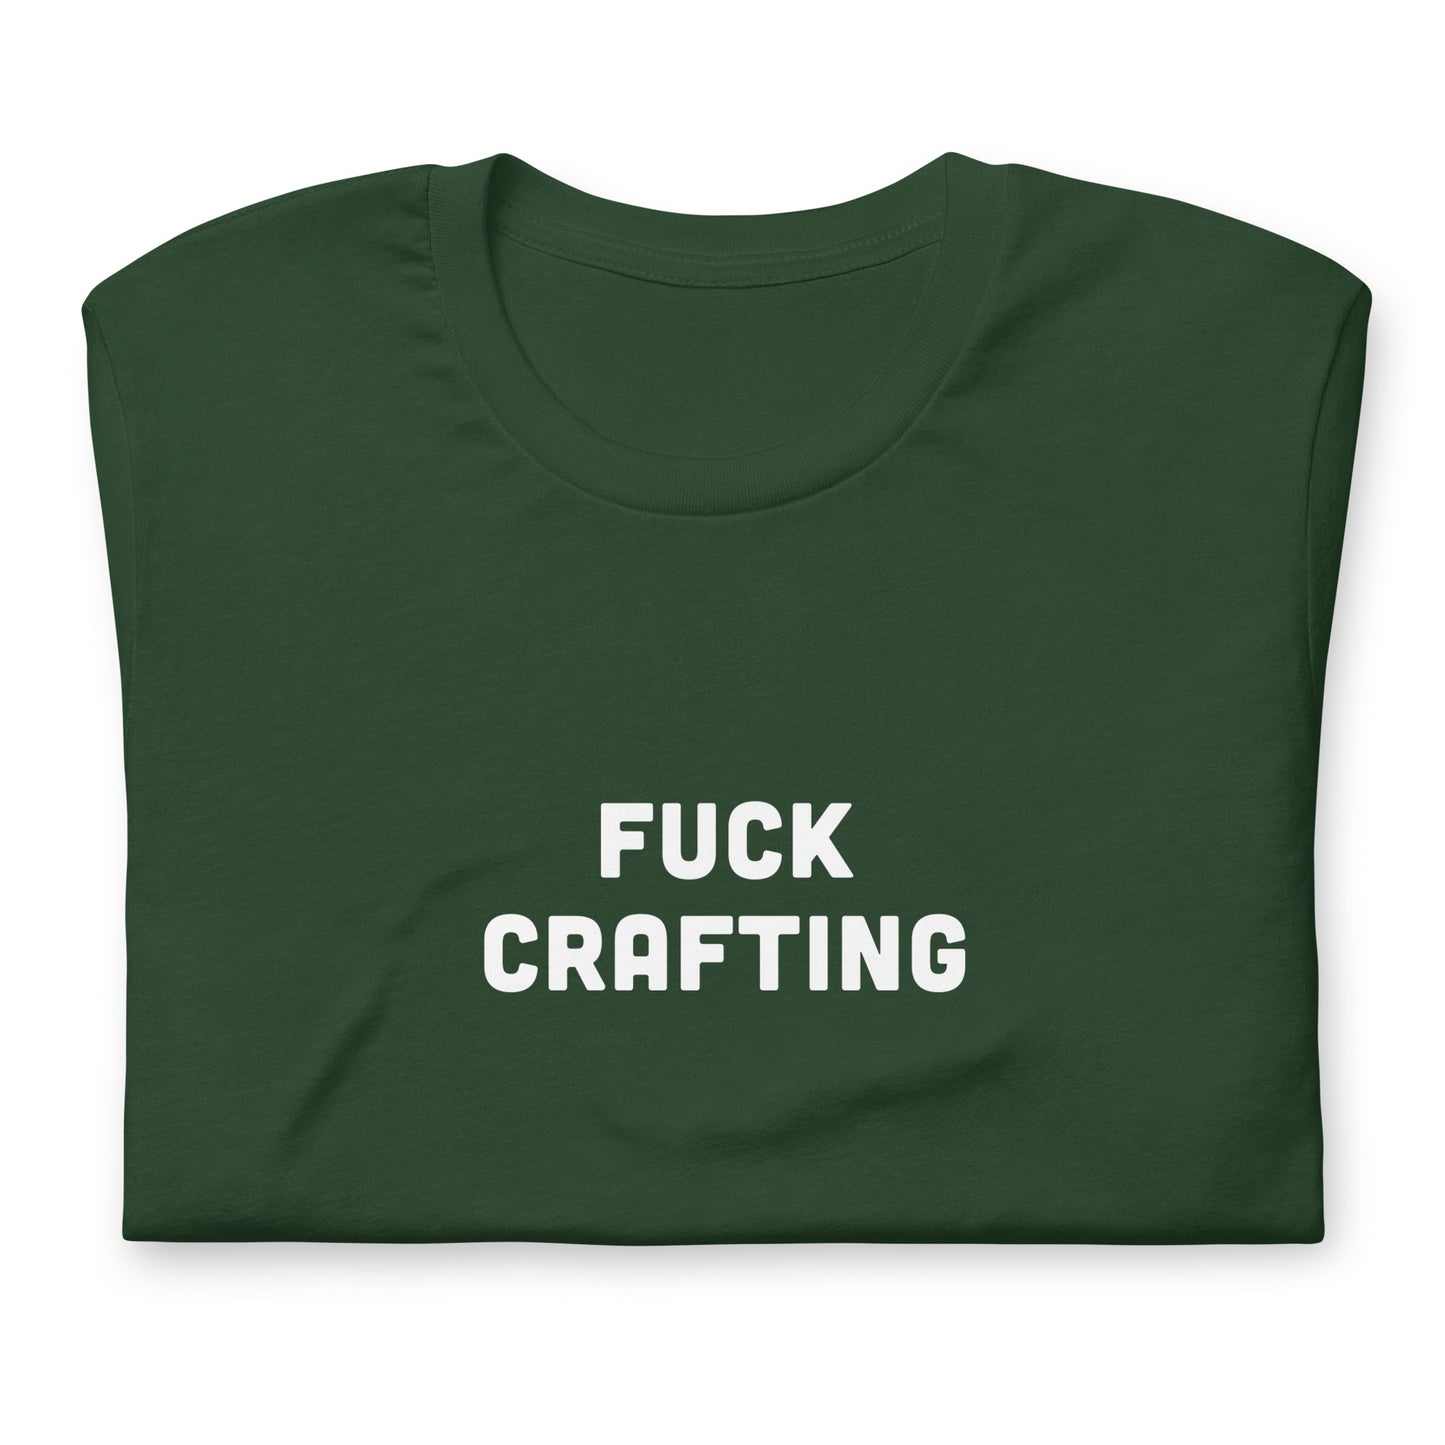 Fuck Crafting T-Shirt Size XL Color Black